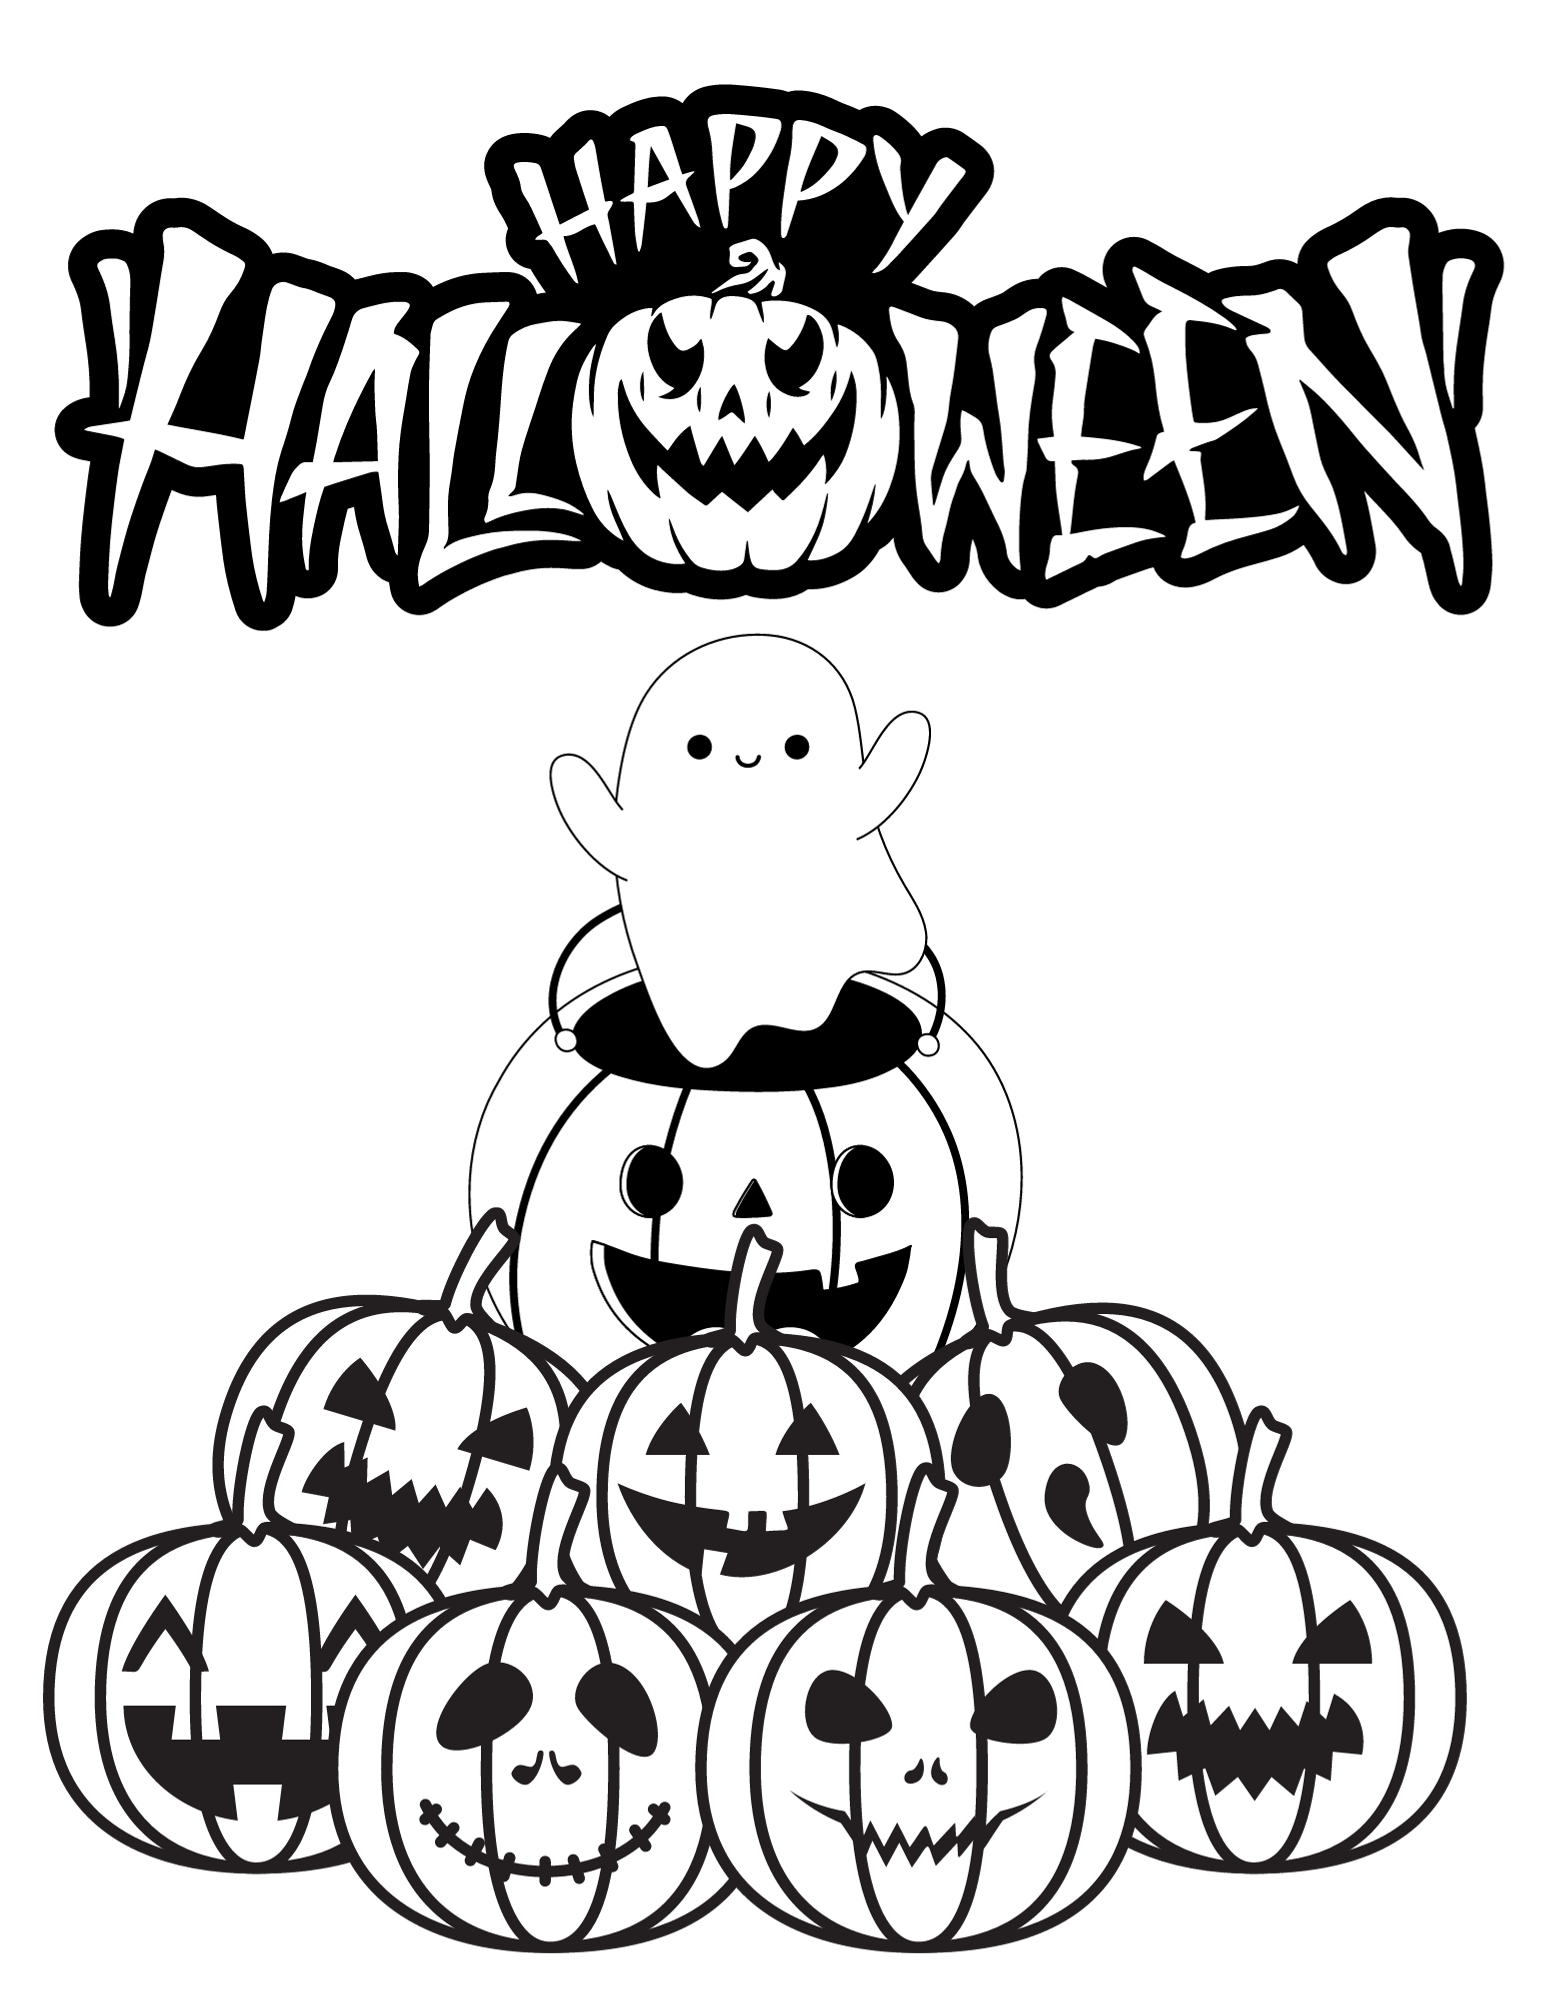 Cute halloween coloring pages for kids and adults